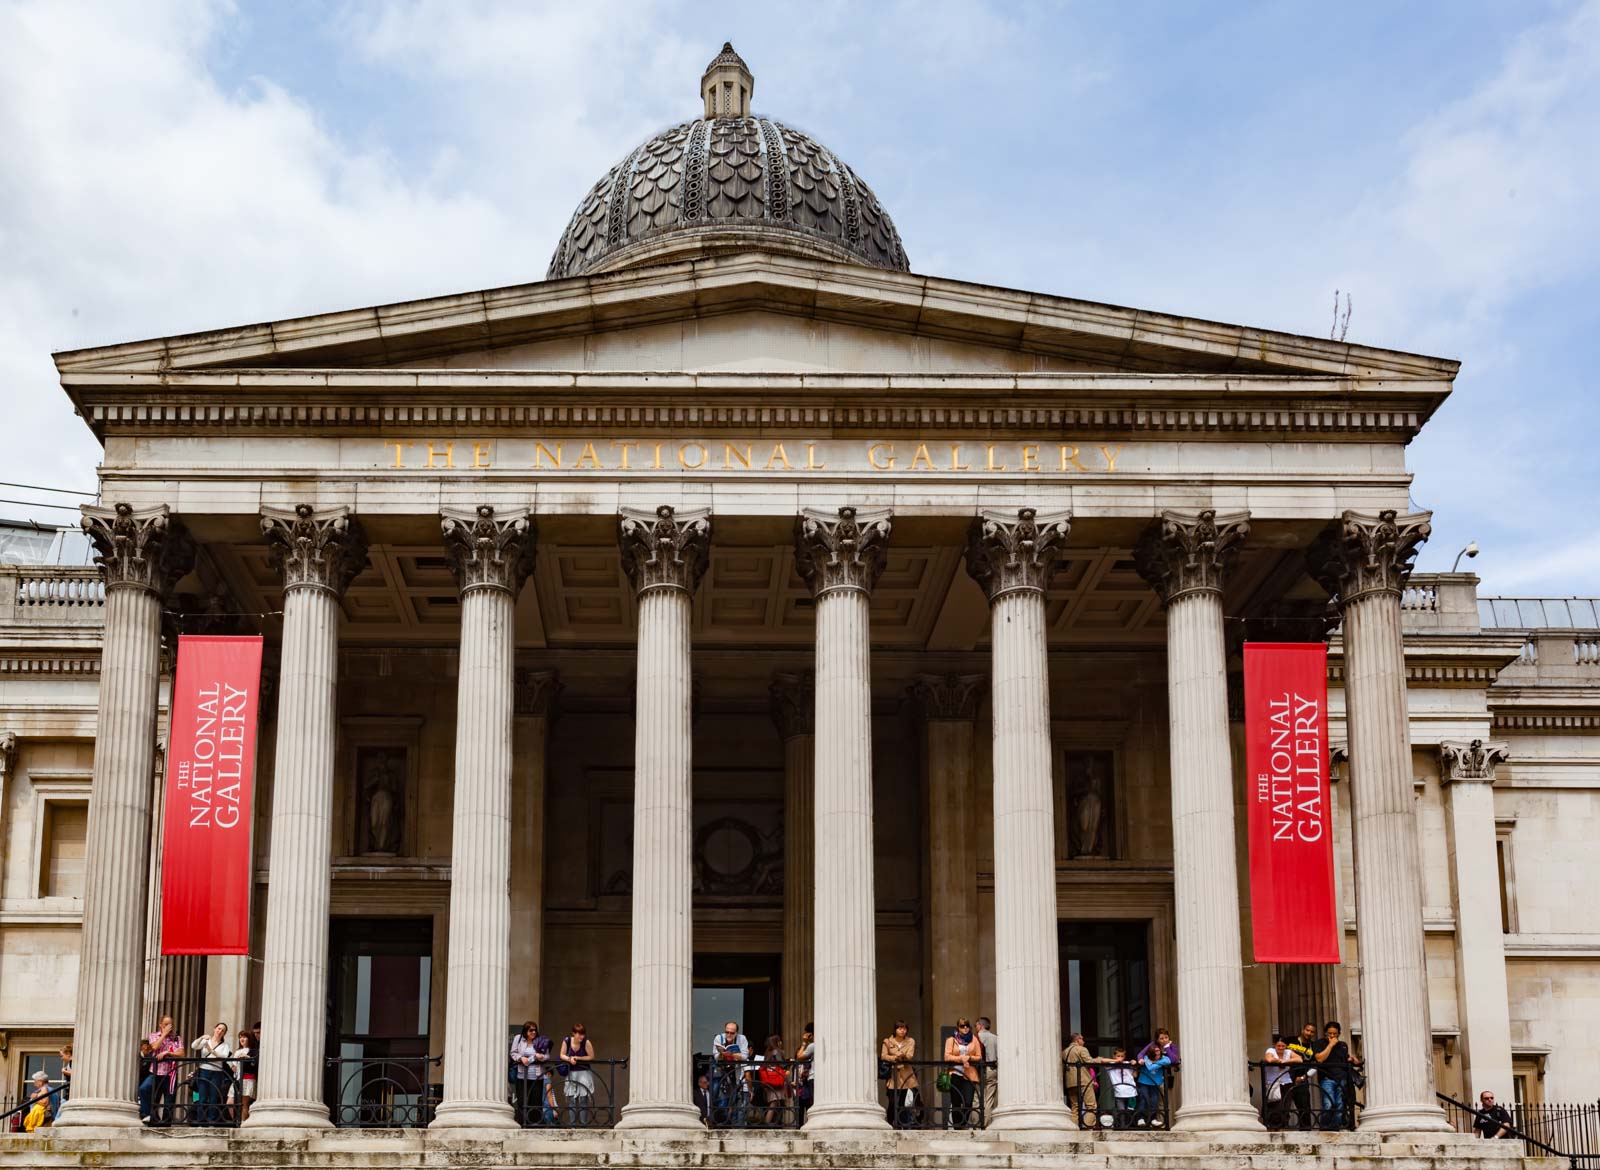 Best Things to do in London The National Gallery